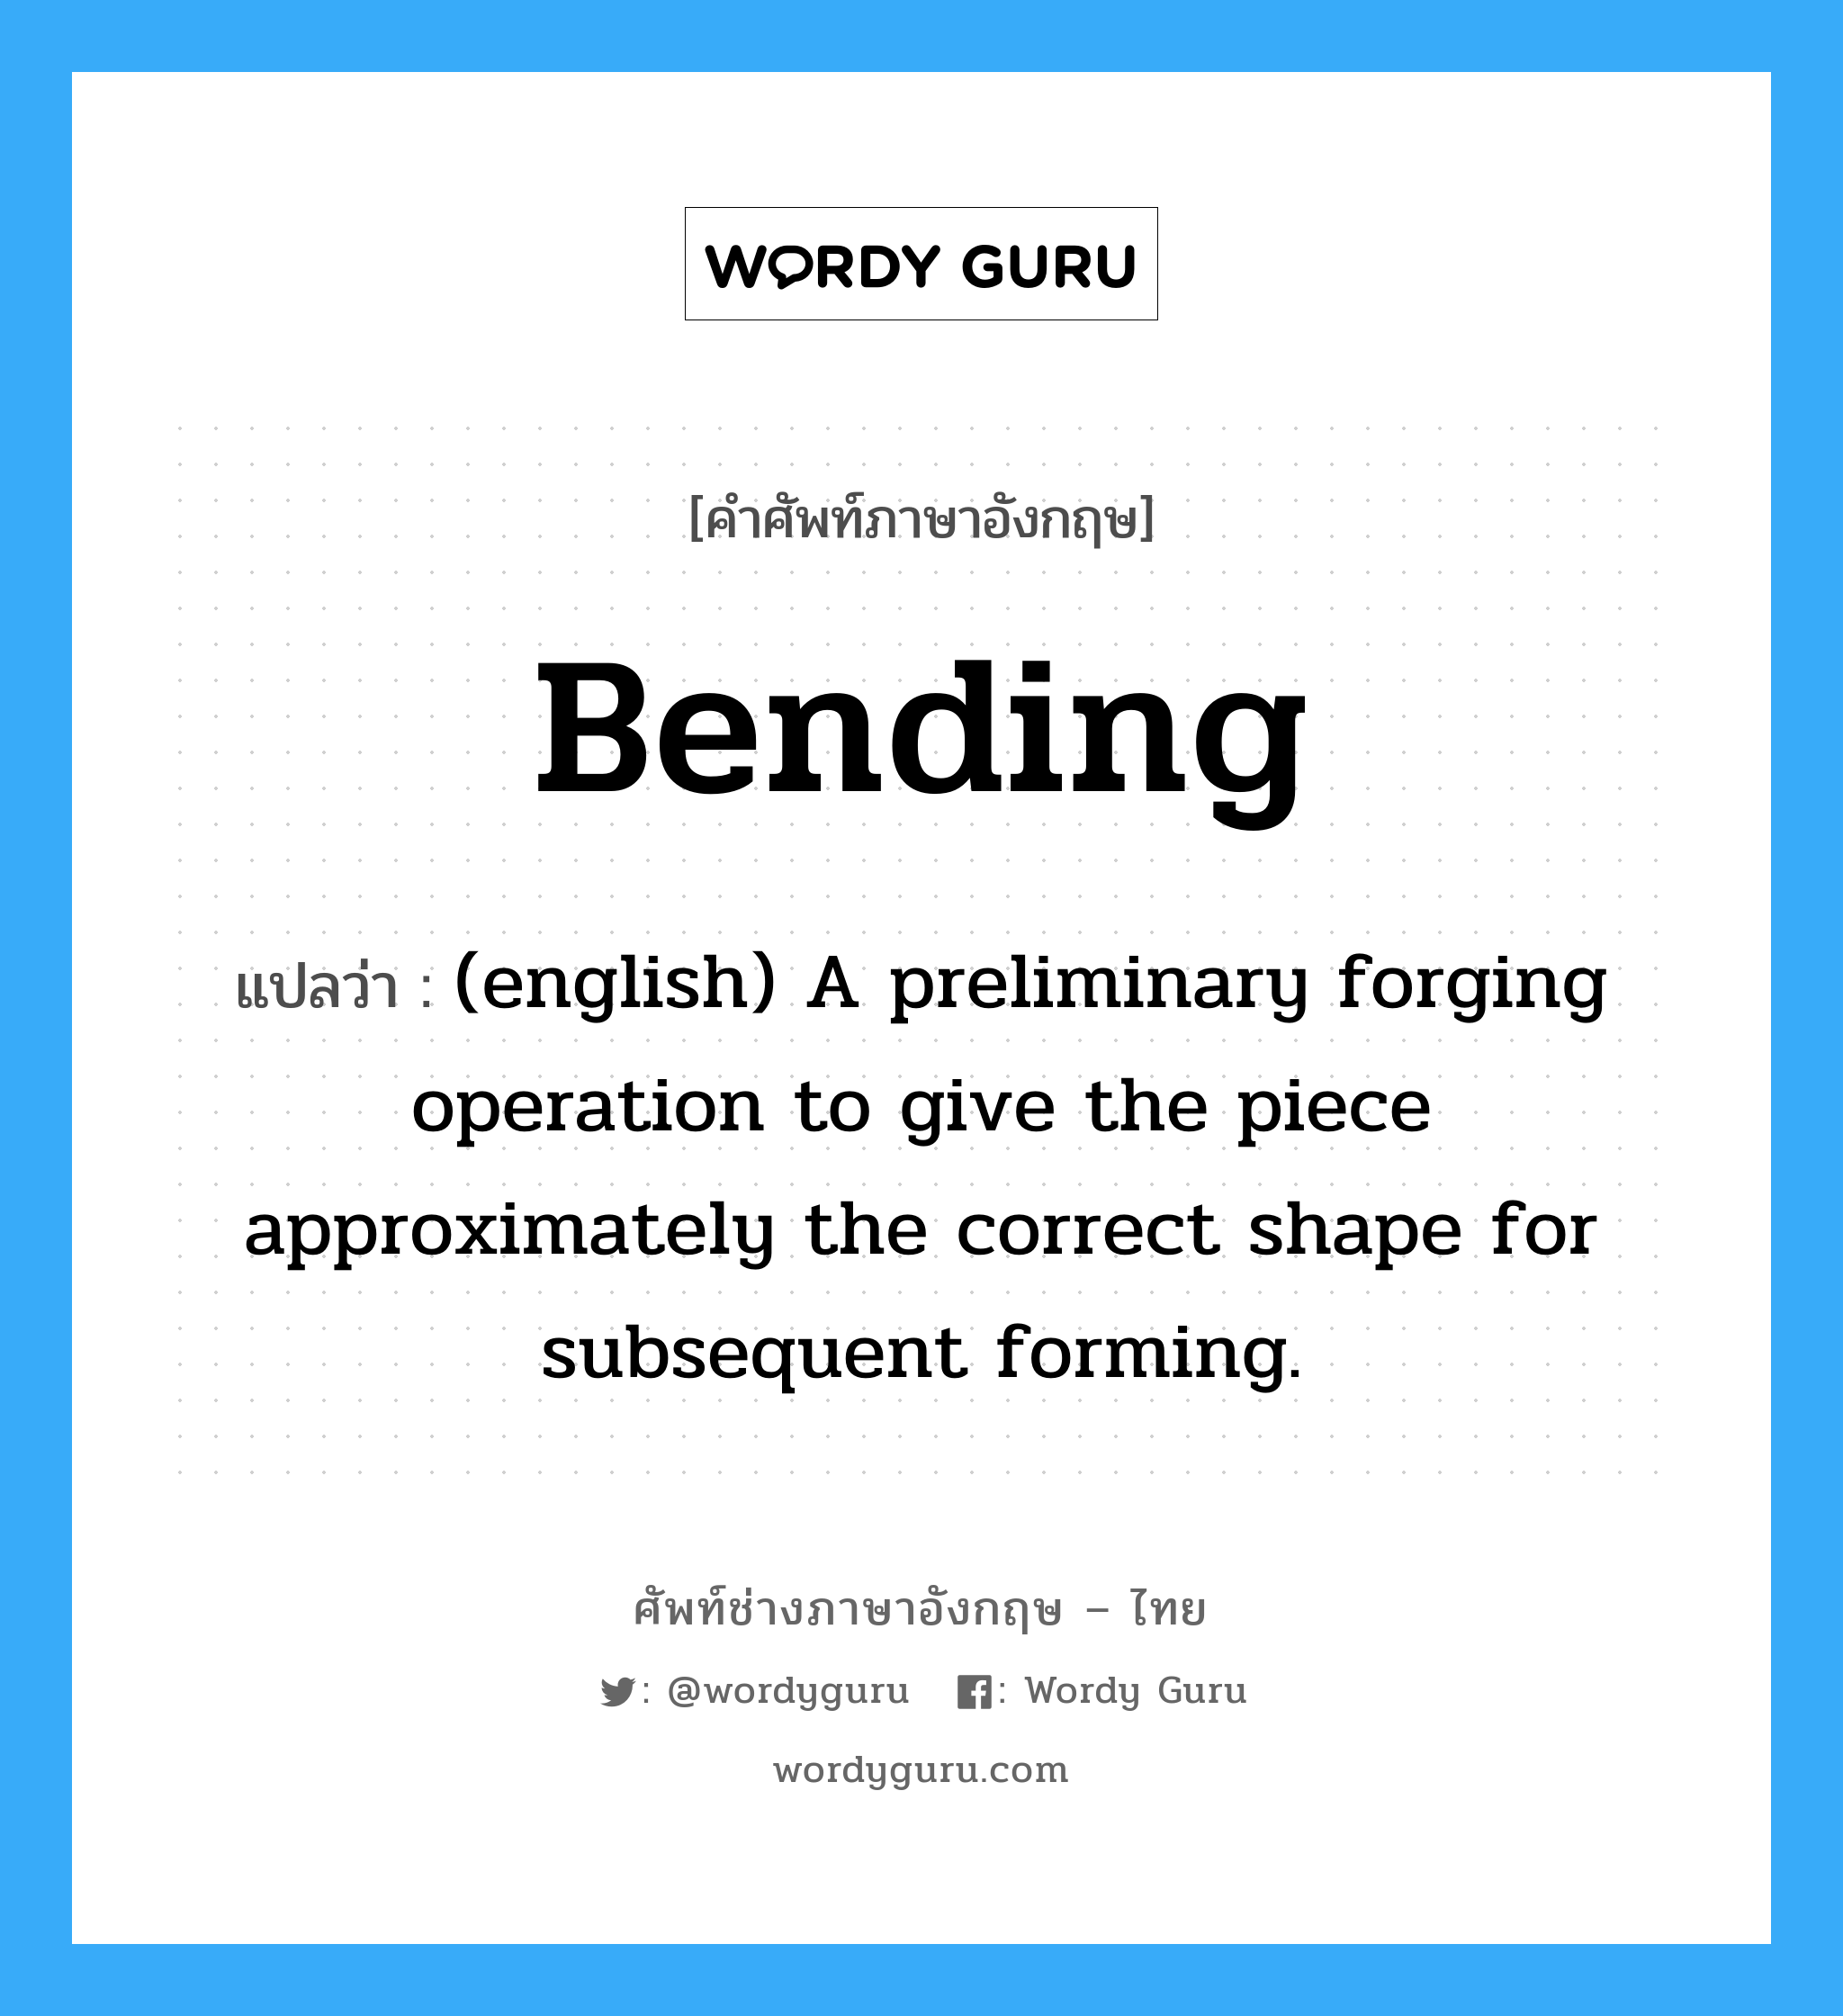 Bending แปลว่า?, คำศัพท์ช่างภาษาอังกฤษ - ไทย Bending คำศัพท์ภาษาอังกฤษ Bending แปลว่า (english) A preliminary forging operation to give the piece approximately the correct shape for subsequent forming.